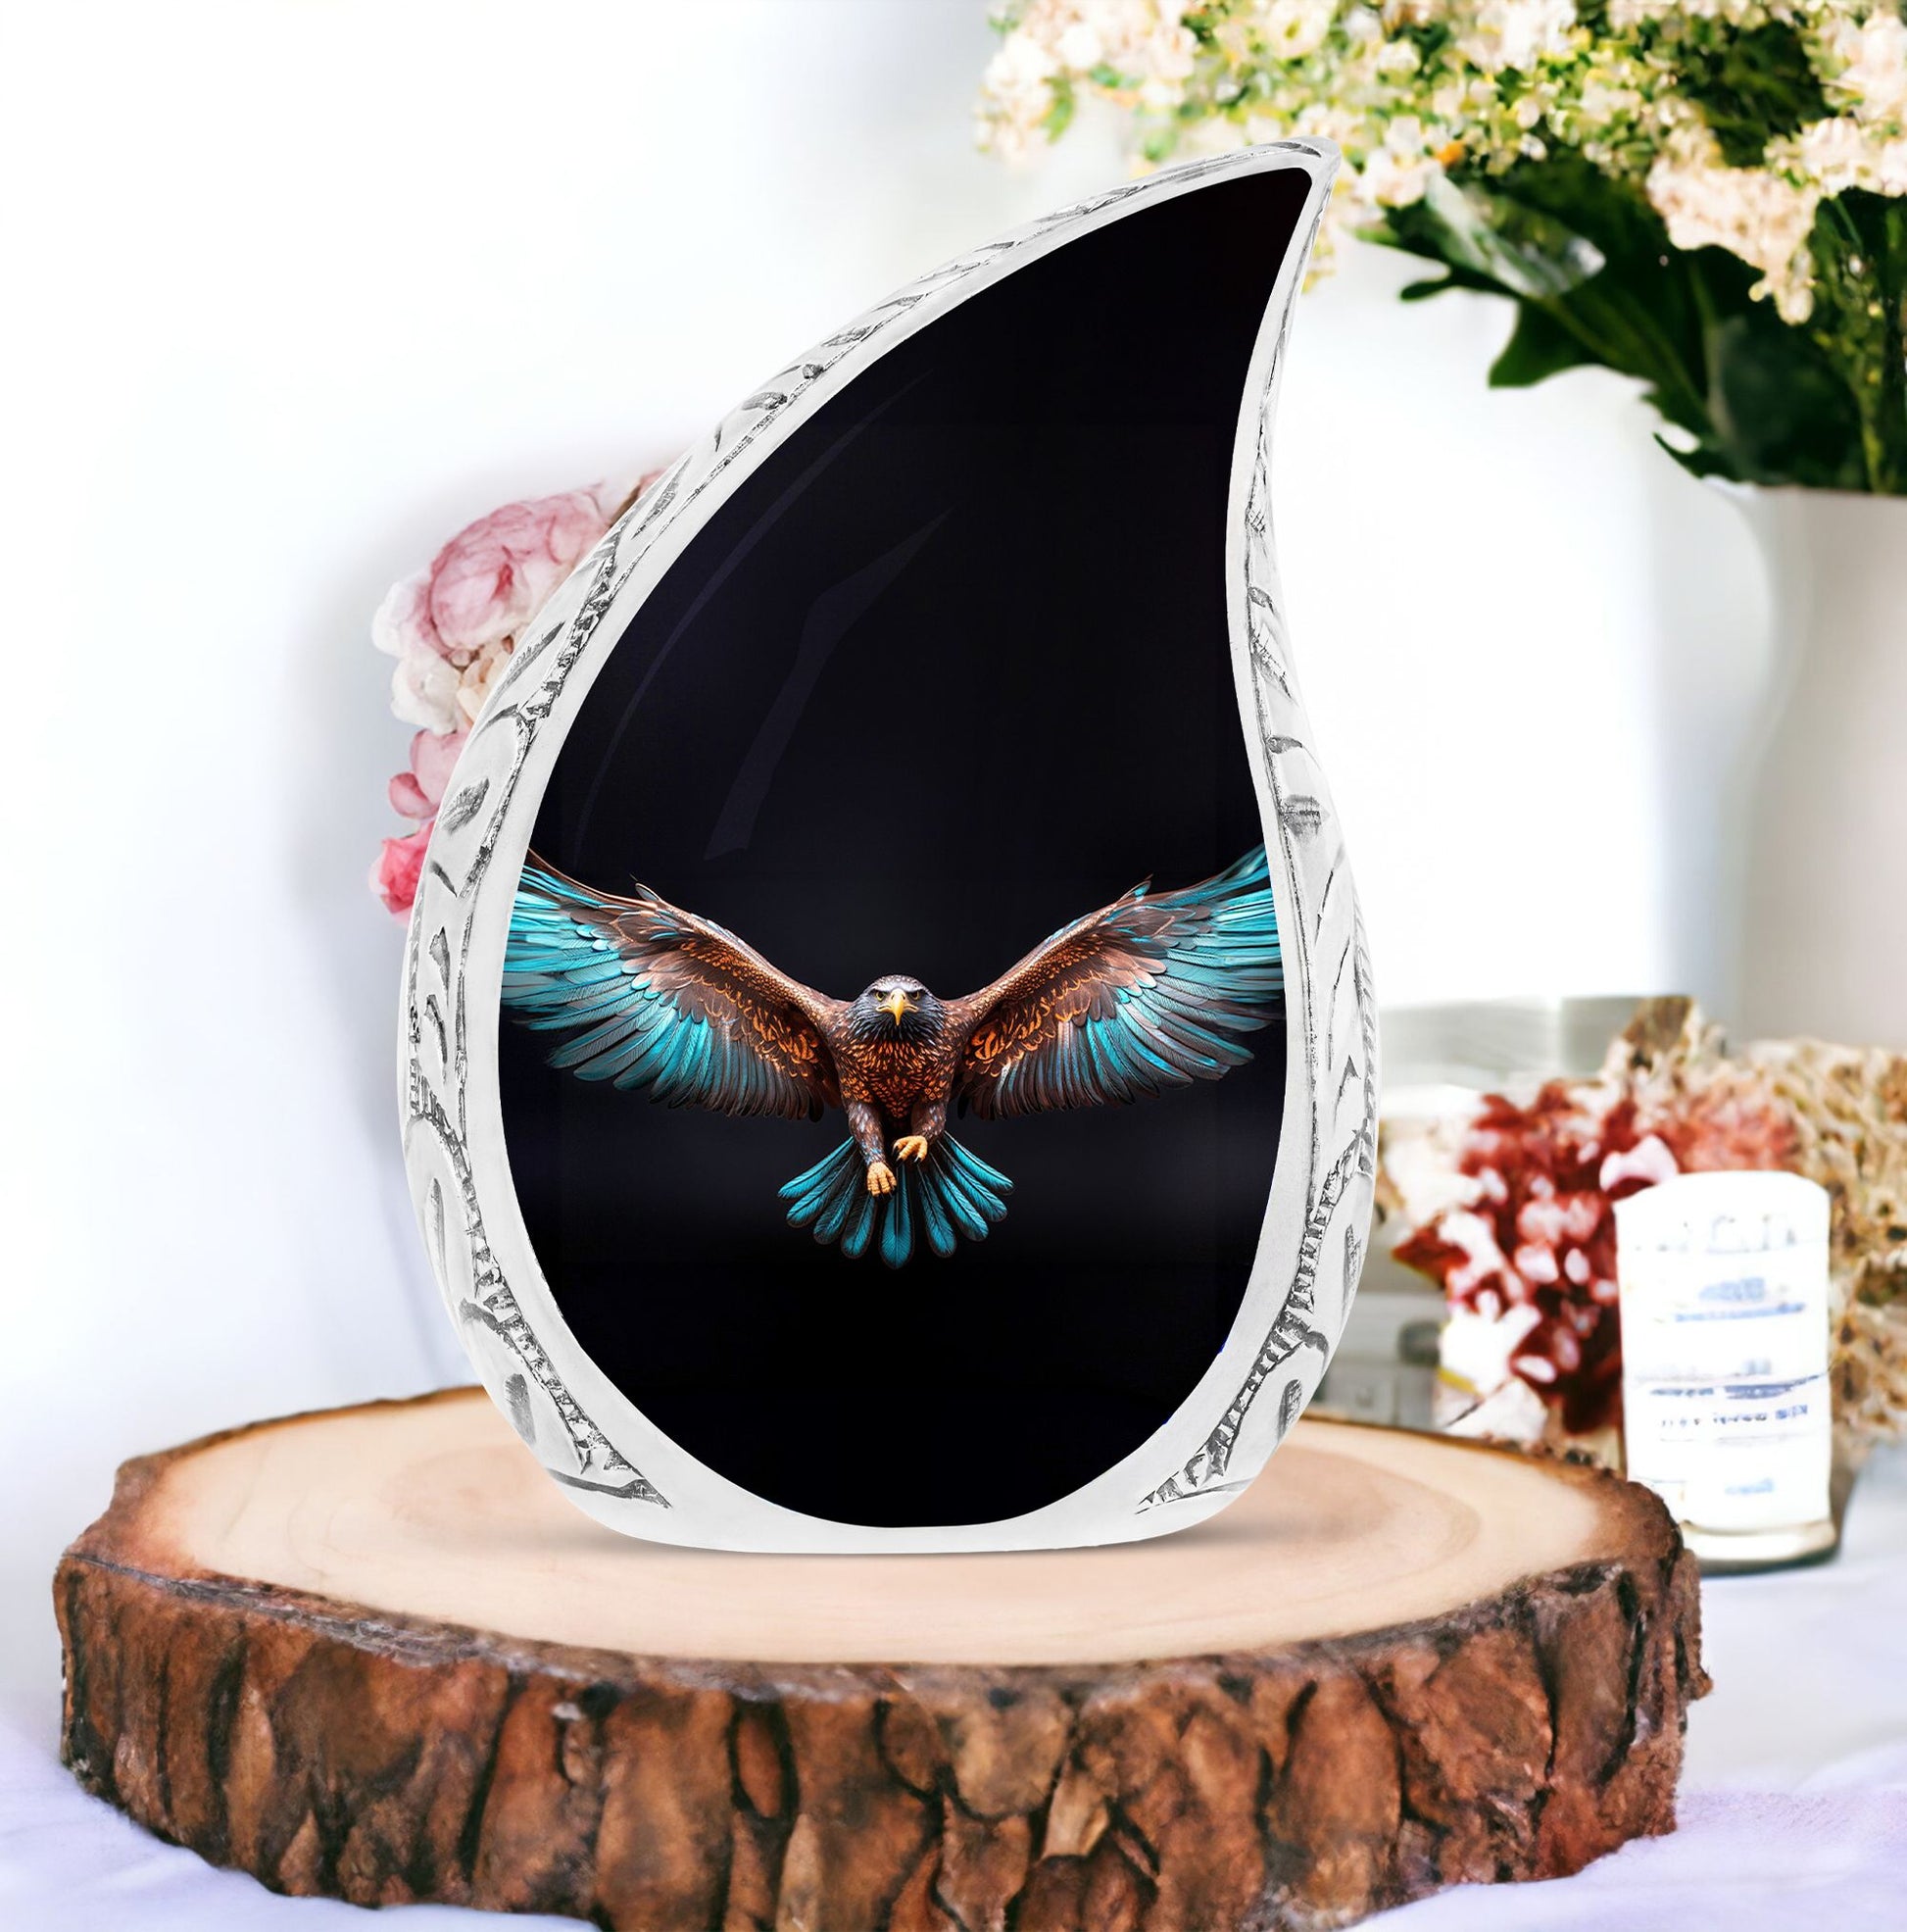 Large Eagle Urn with spread wings on a black background, suitable for adult human ashes burial and memorial purposes